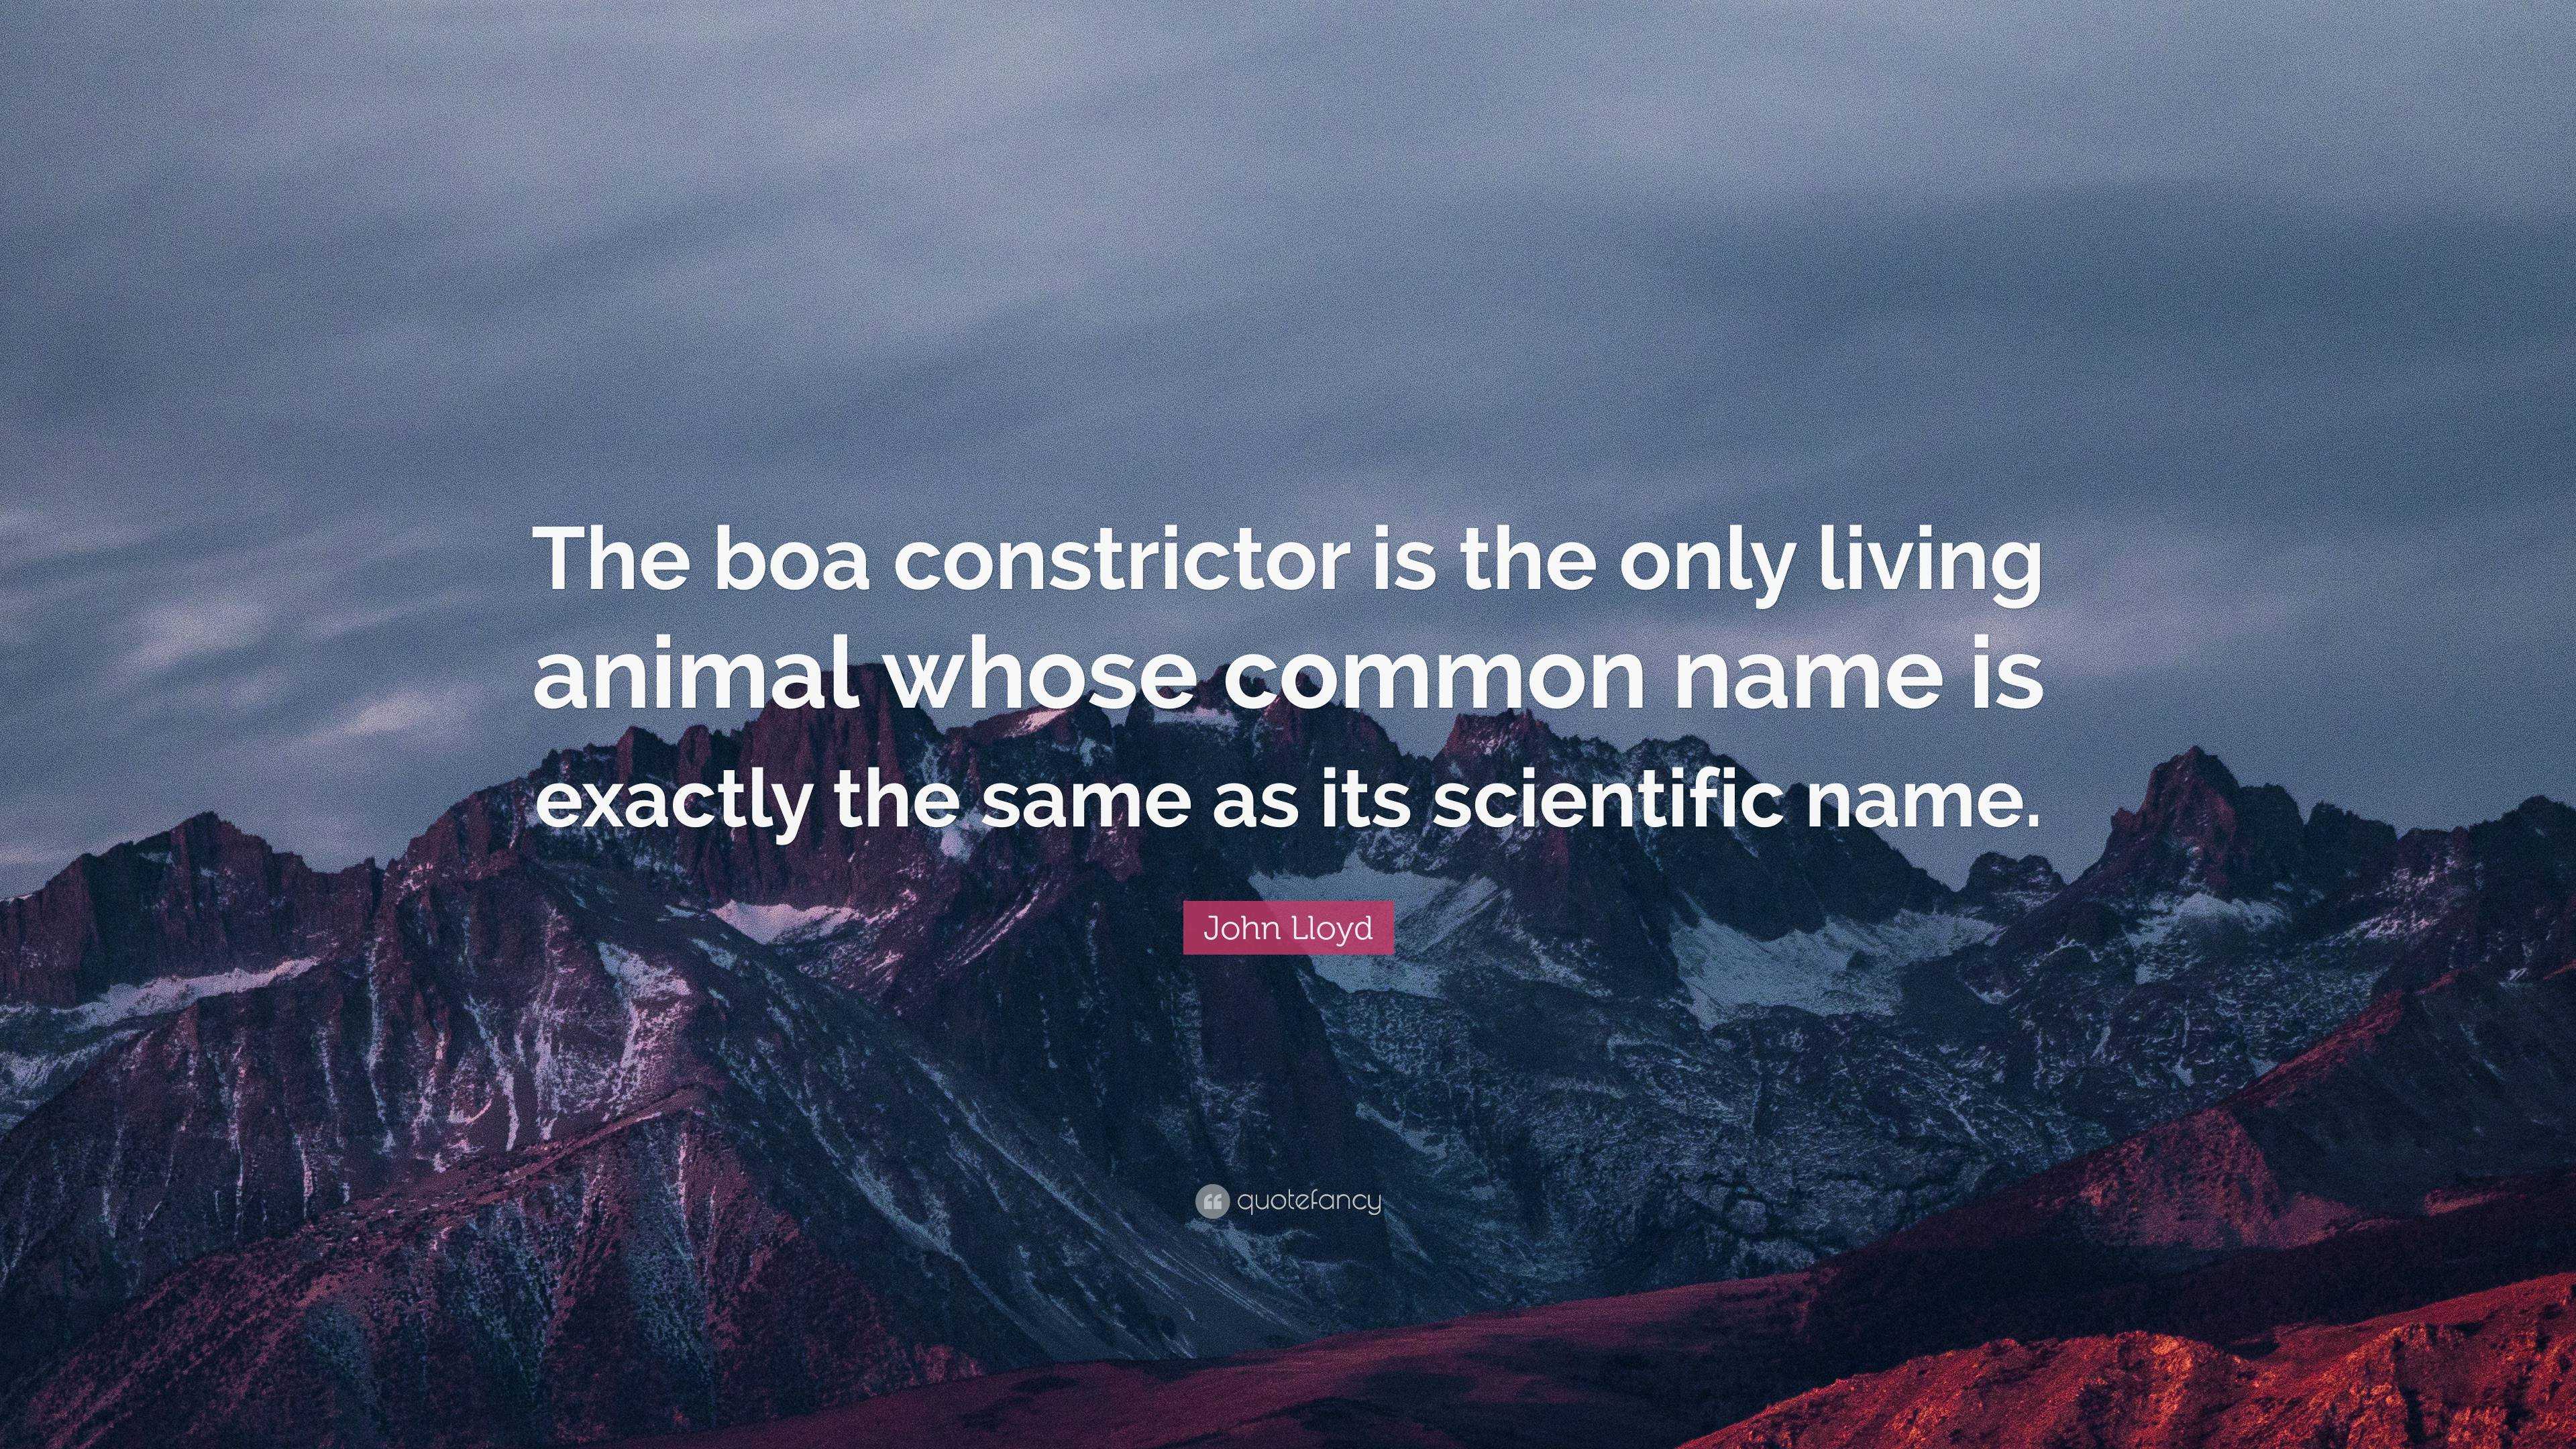 John Lloyd Quote: “The boa constrictor is the only living animal whose common  name is exactly